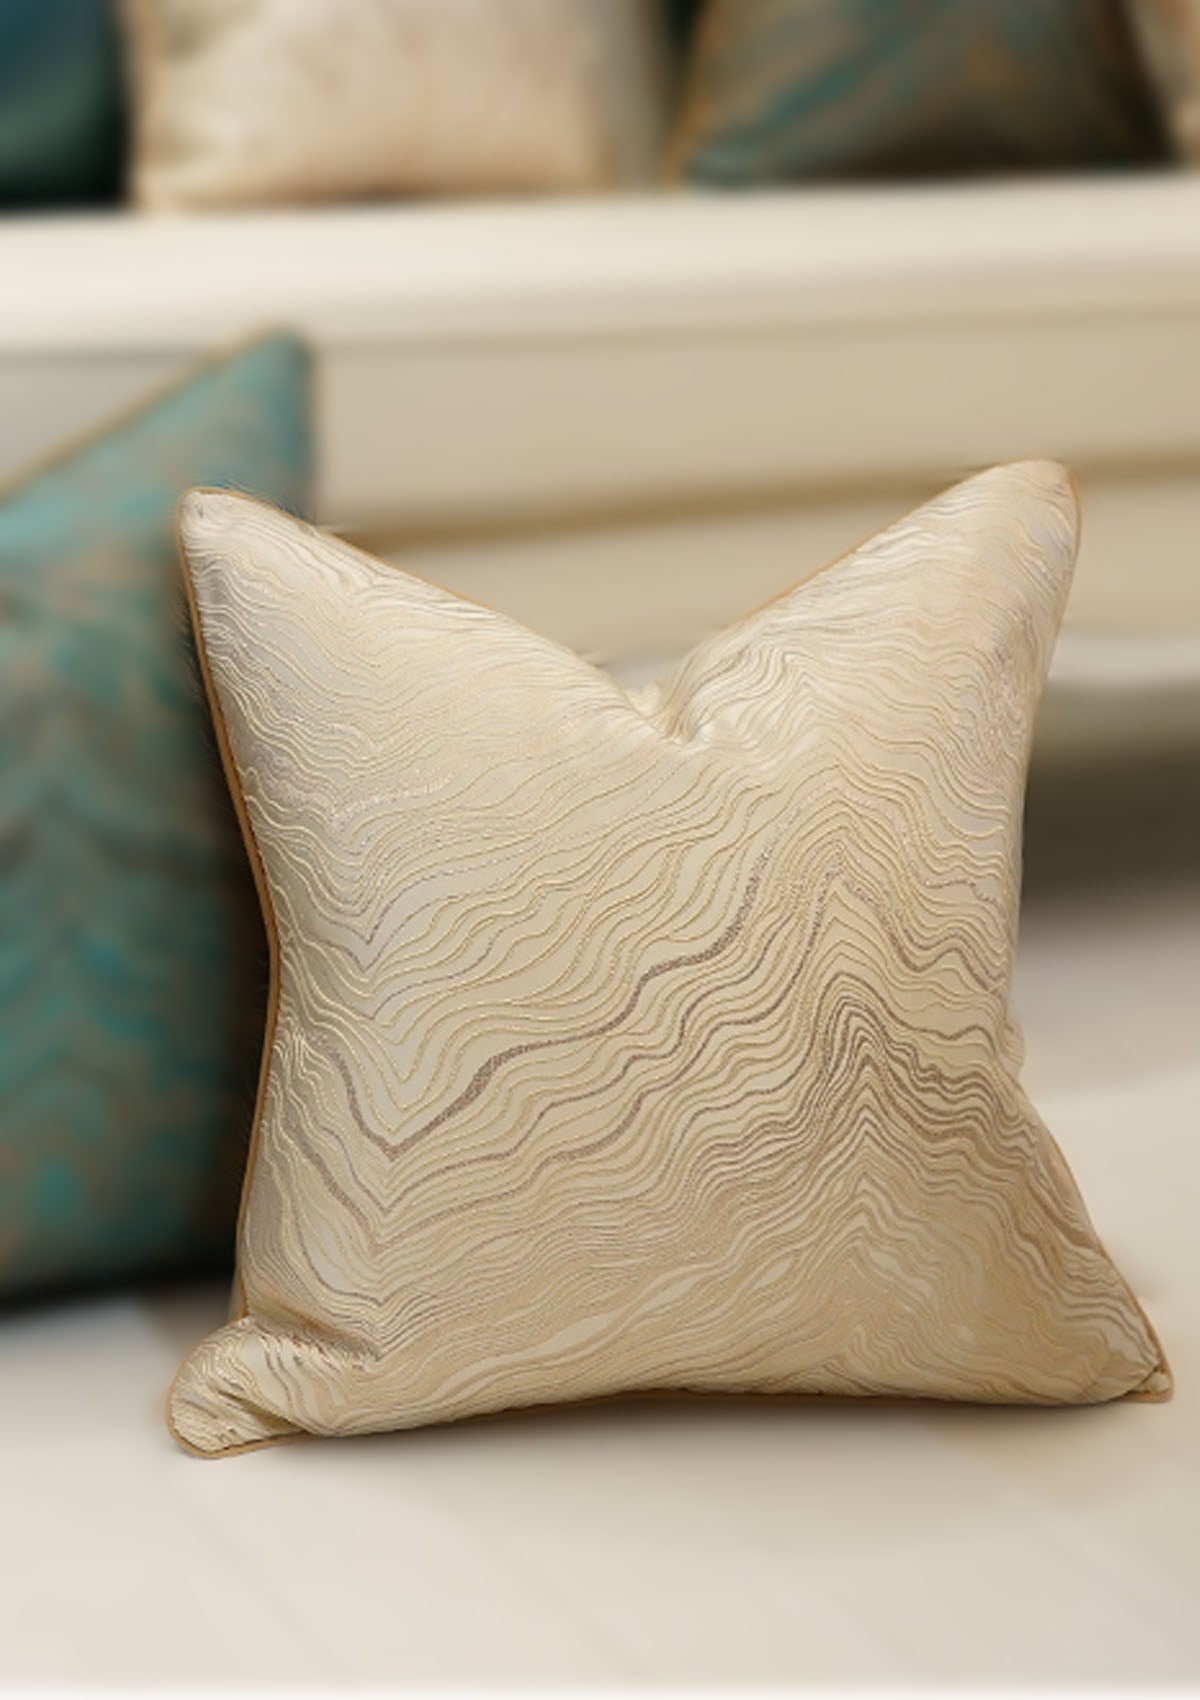 Luxurious beige and gold cushion cover with hidden zipper closure